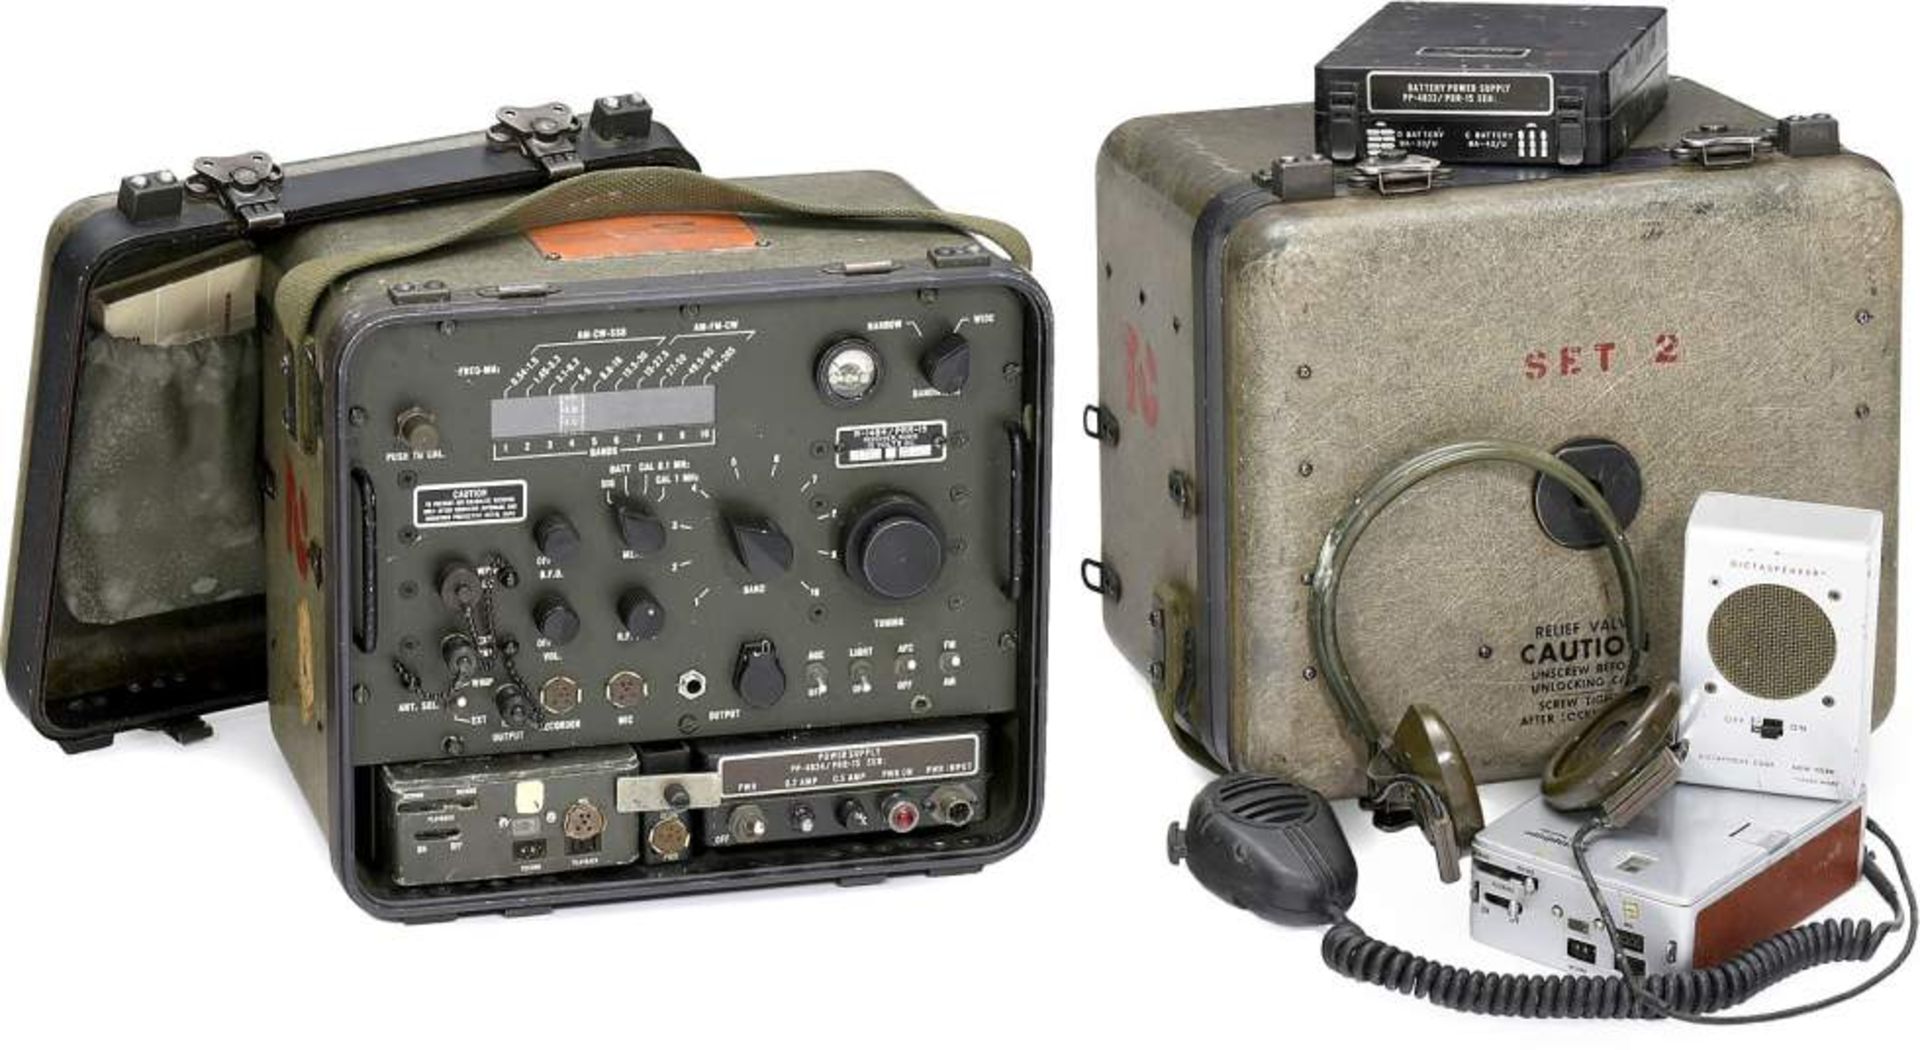 AN/PRR-15 Military Receiving Radio Set, c. 1956
Manufacturer: Zenith Radio Co., Chicago. Used by